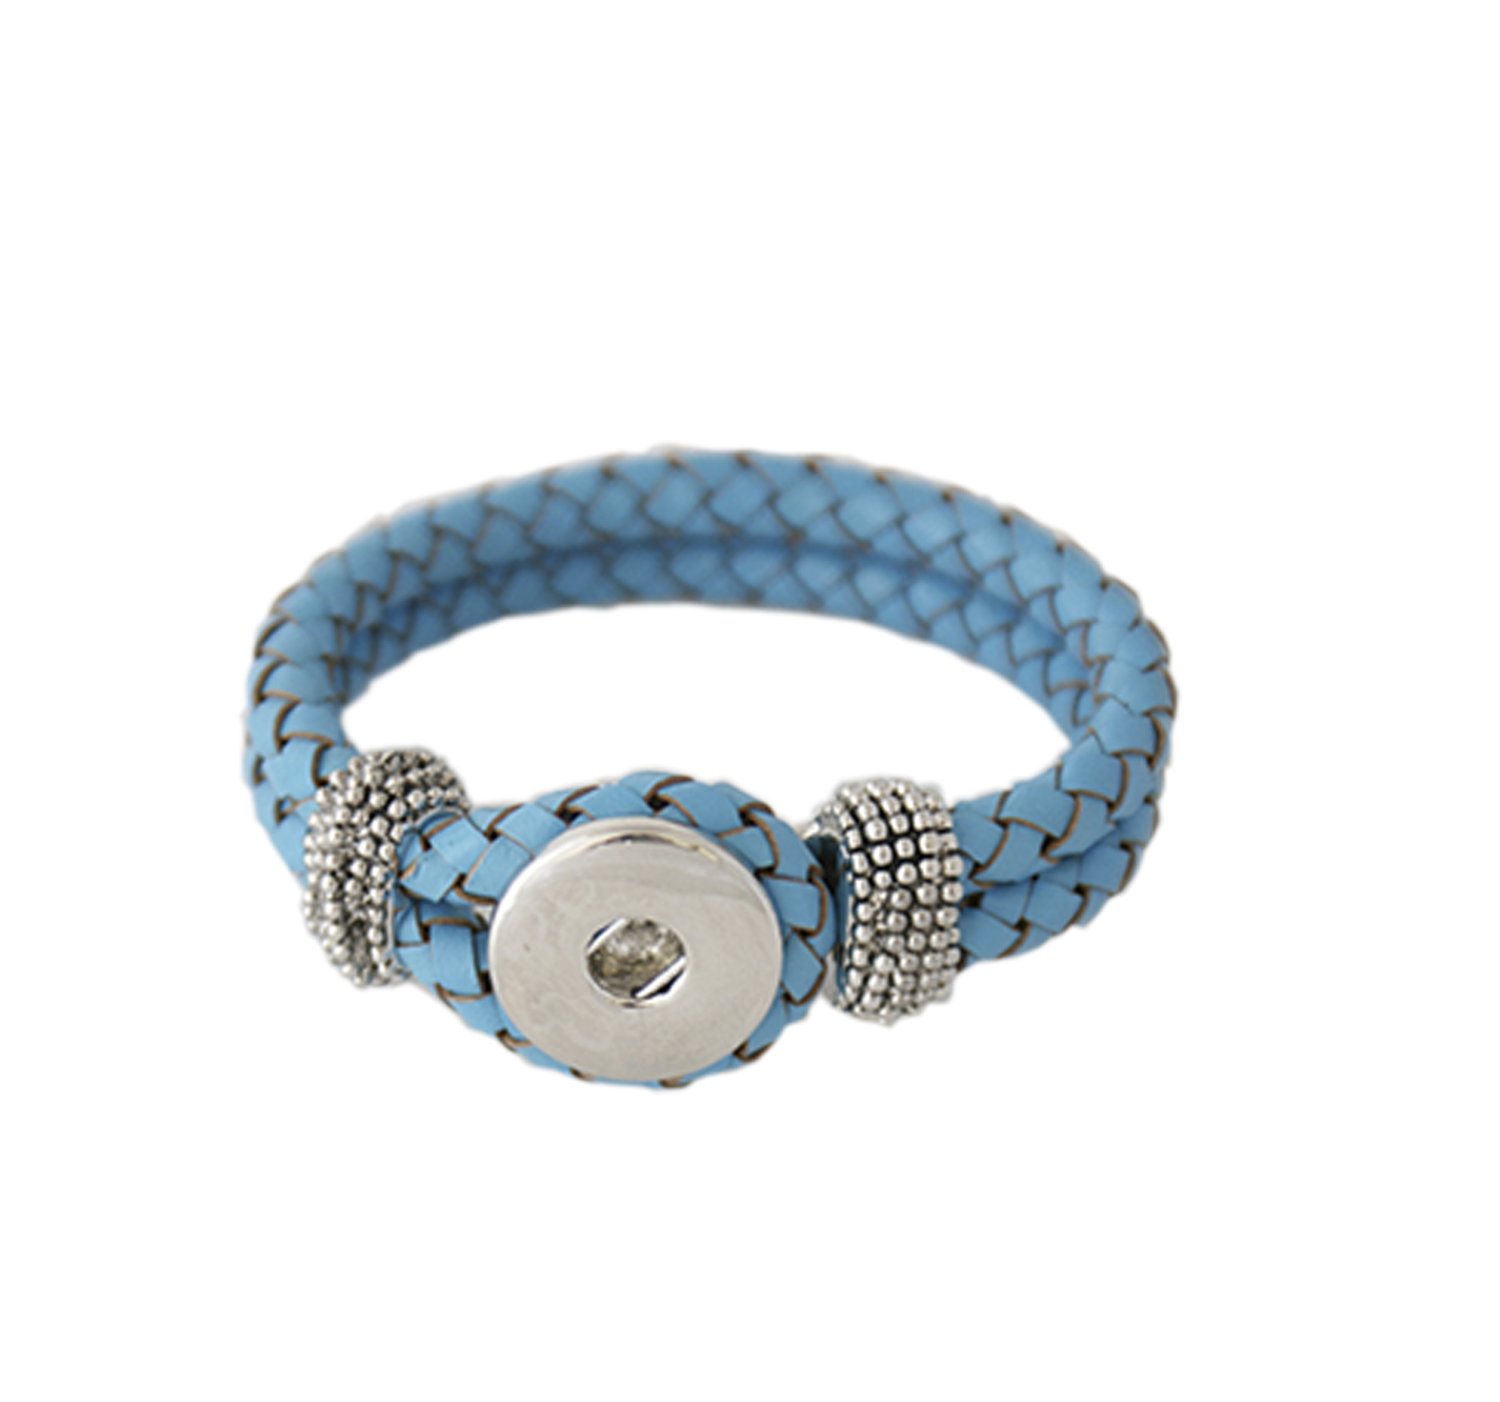 Blue Braided Leather Wrap Bracelet with wood snap